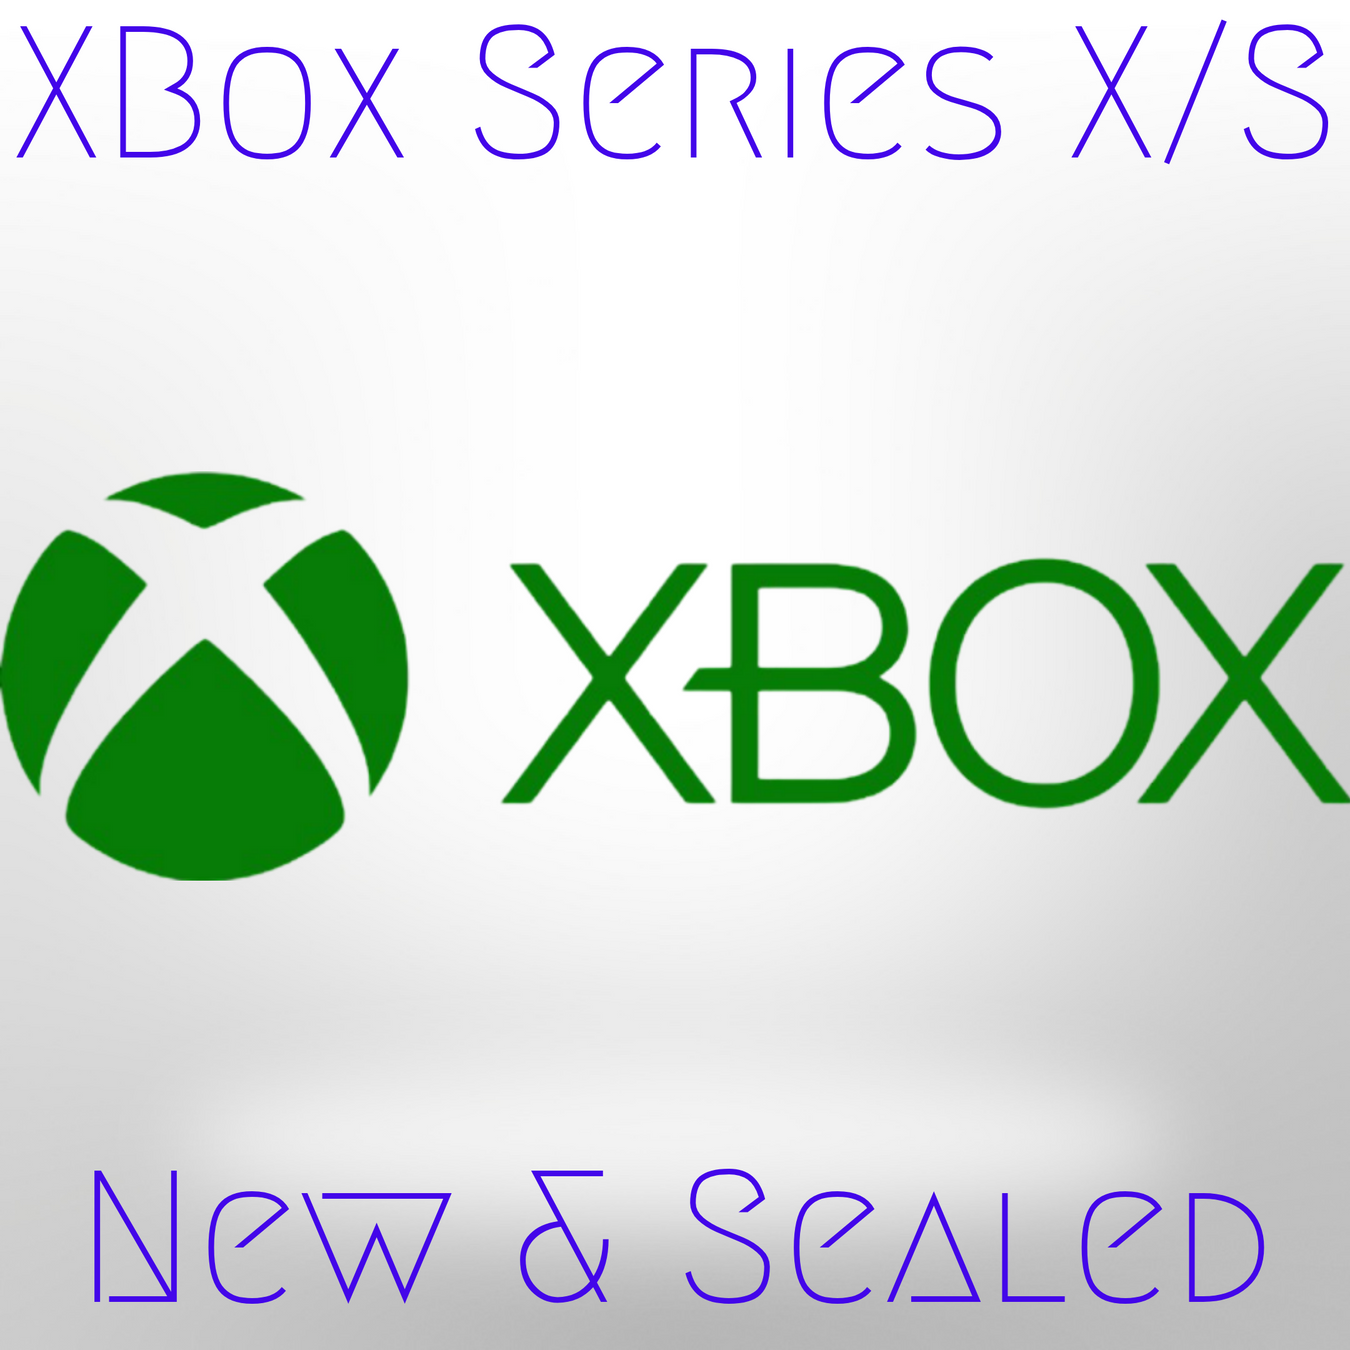 XBox Series X/S New & Sealed section